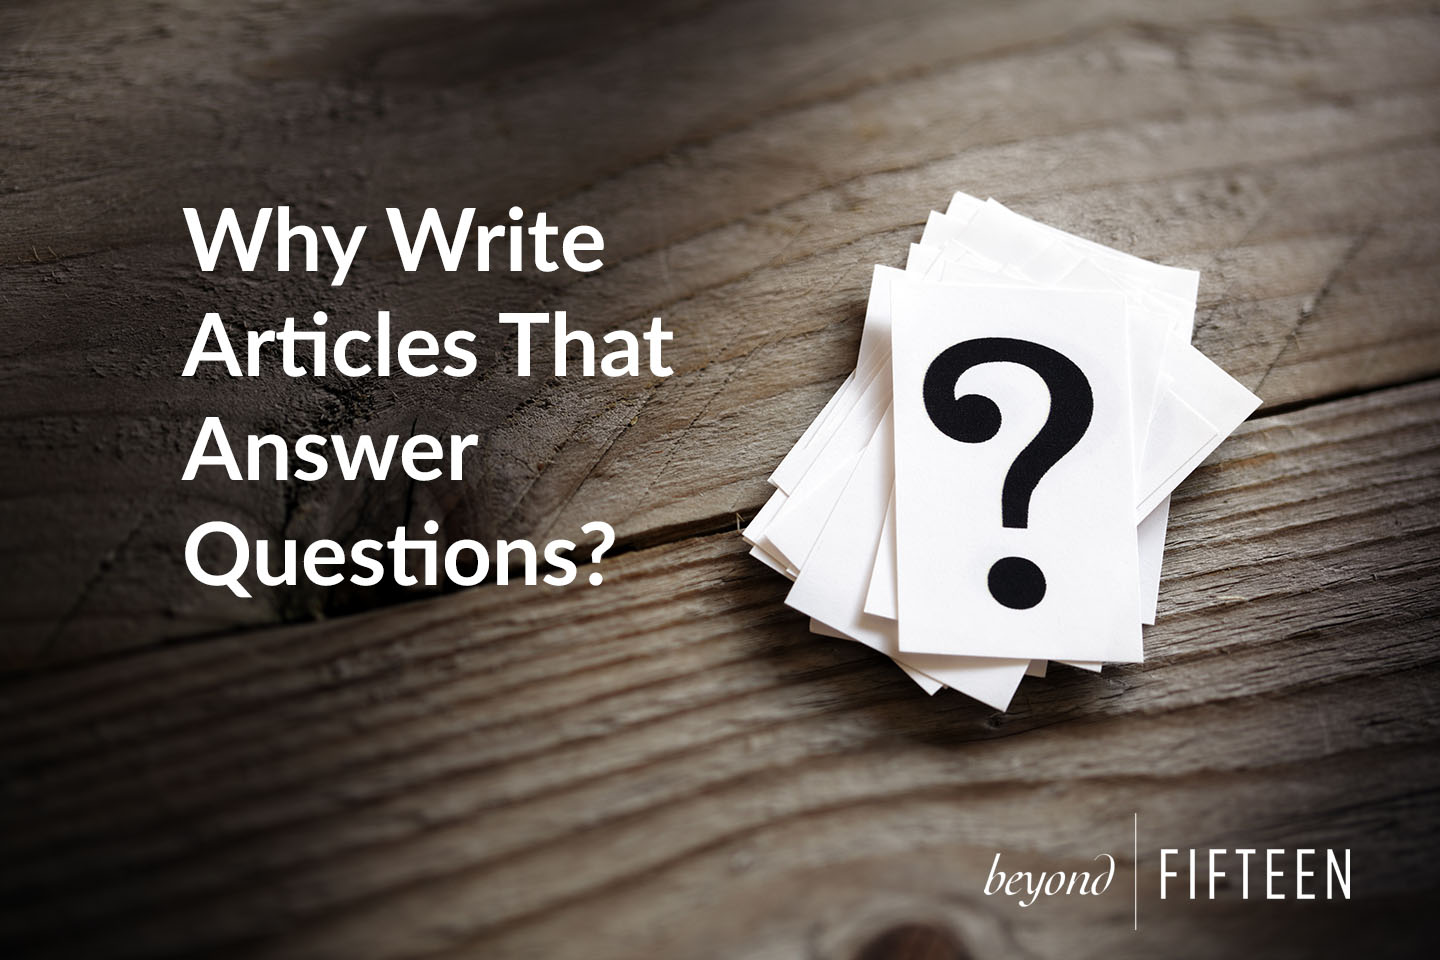 Why Write Articles That Answer Questions?